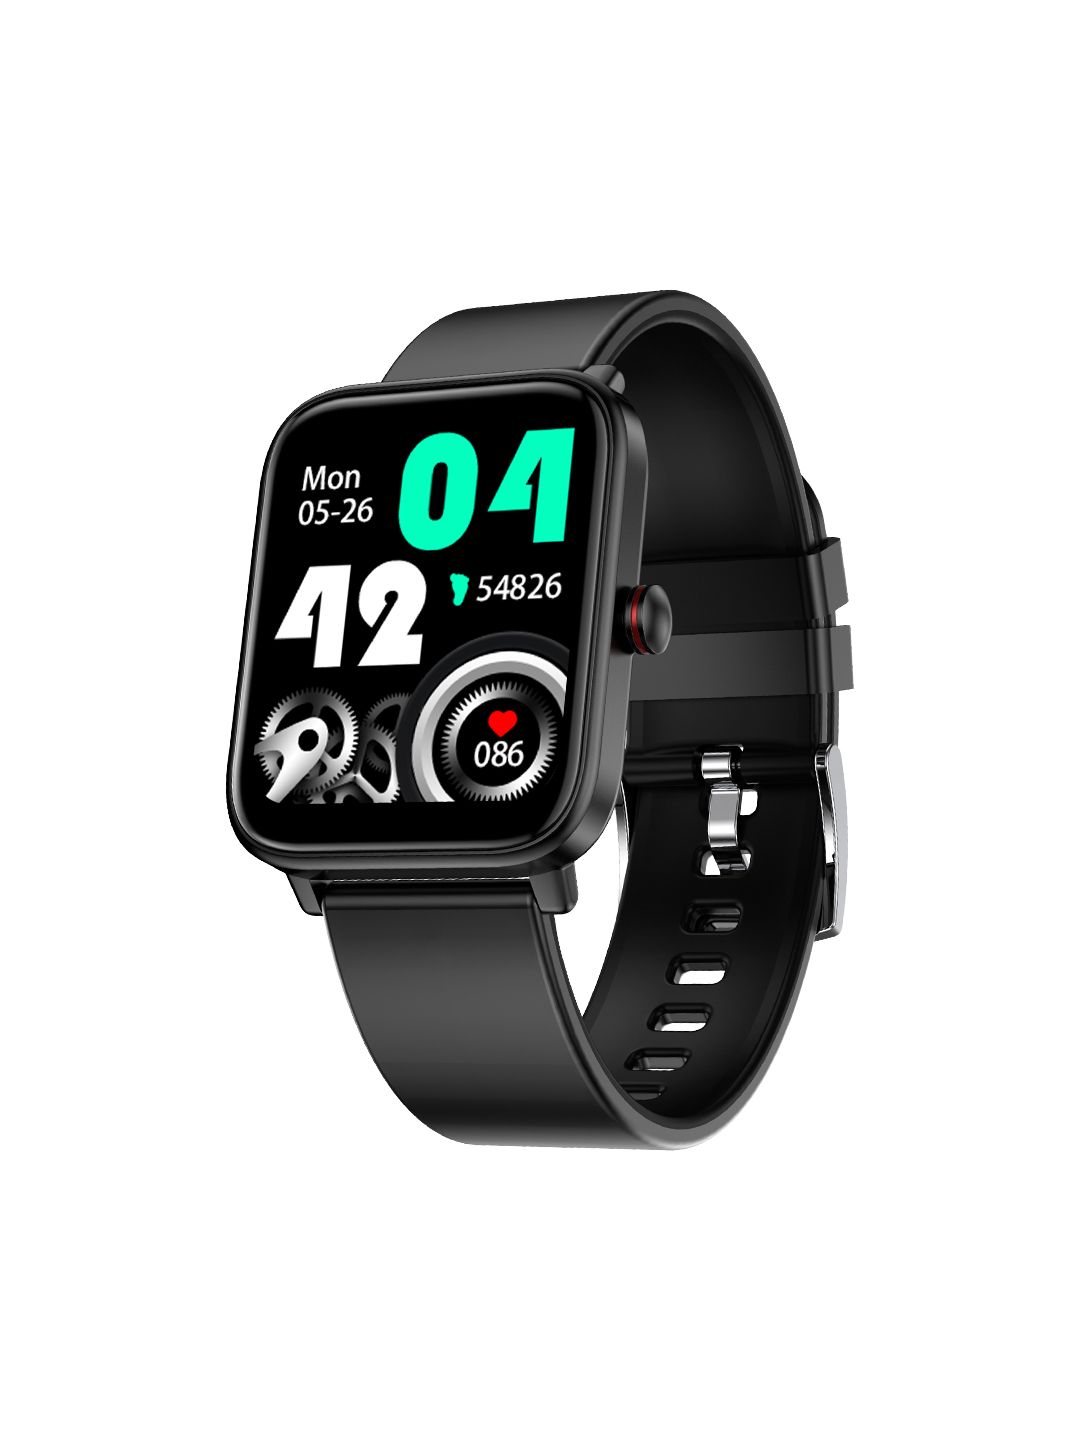 Fire-Boltt Ninja Pro Max Smartwatch with 27 Sports Modes (Black) Price in India